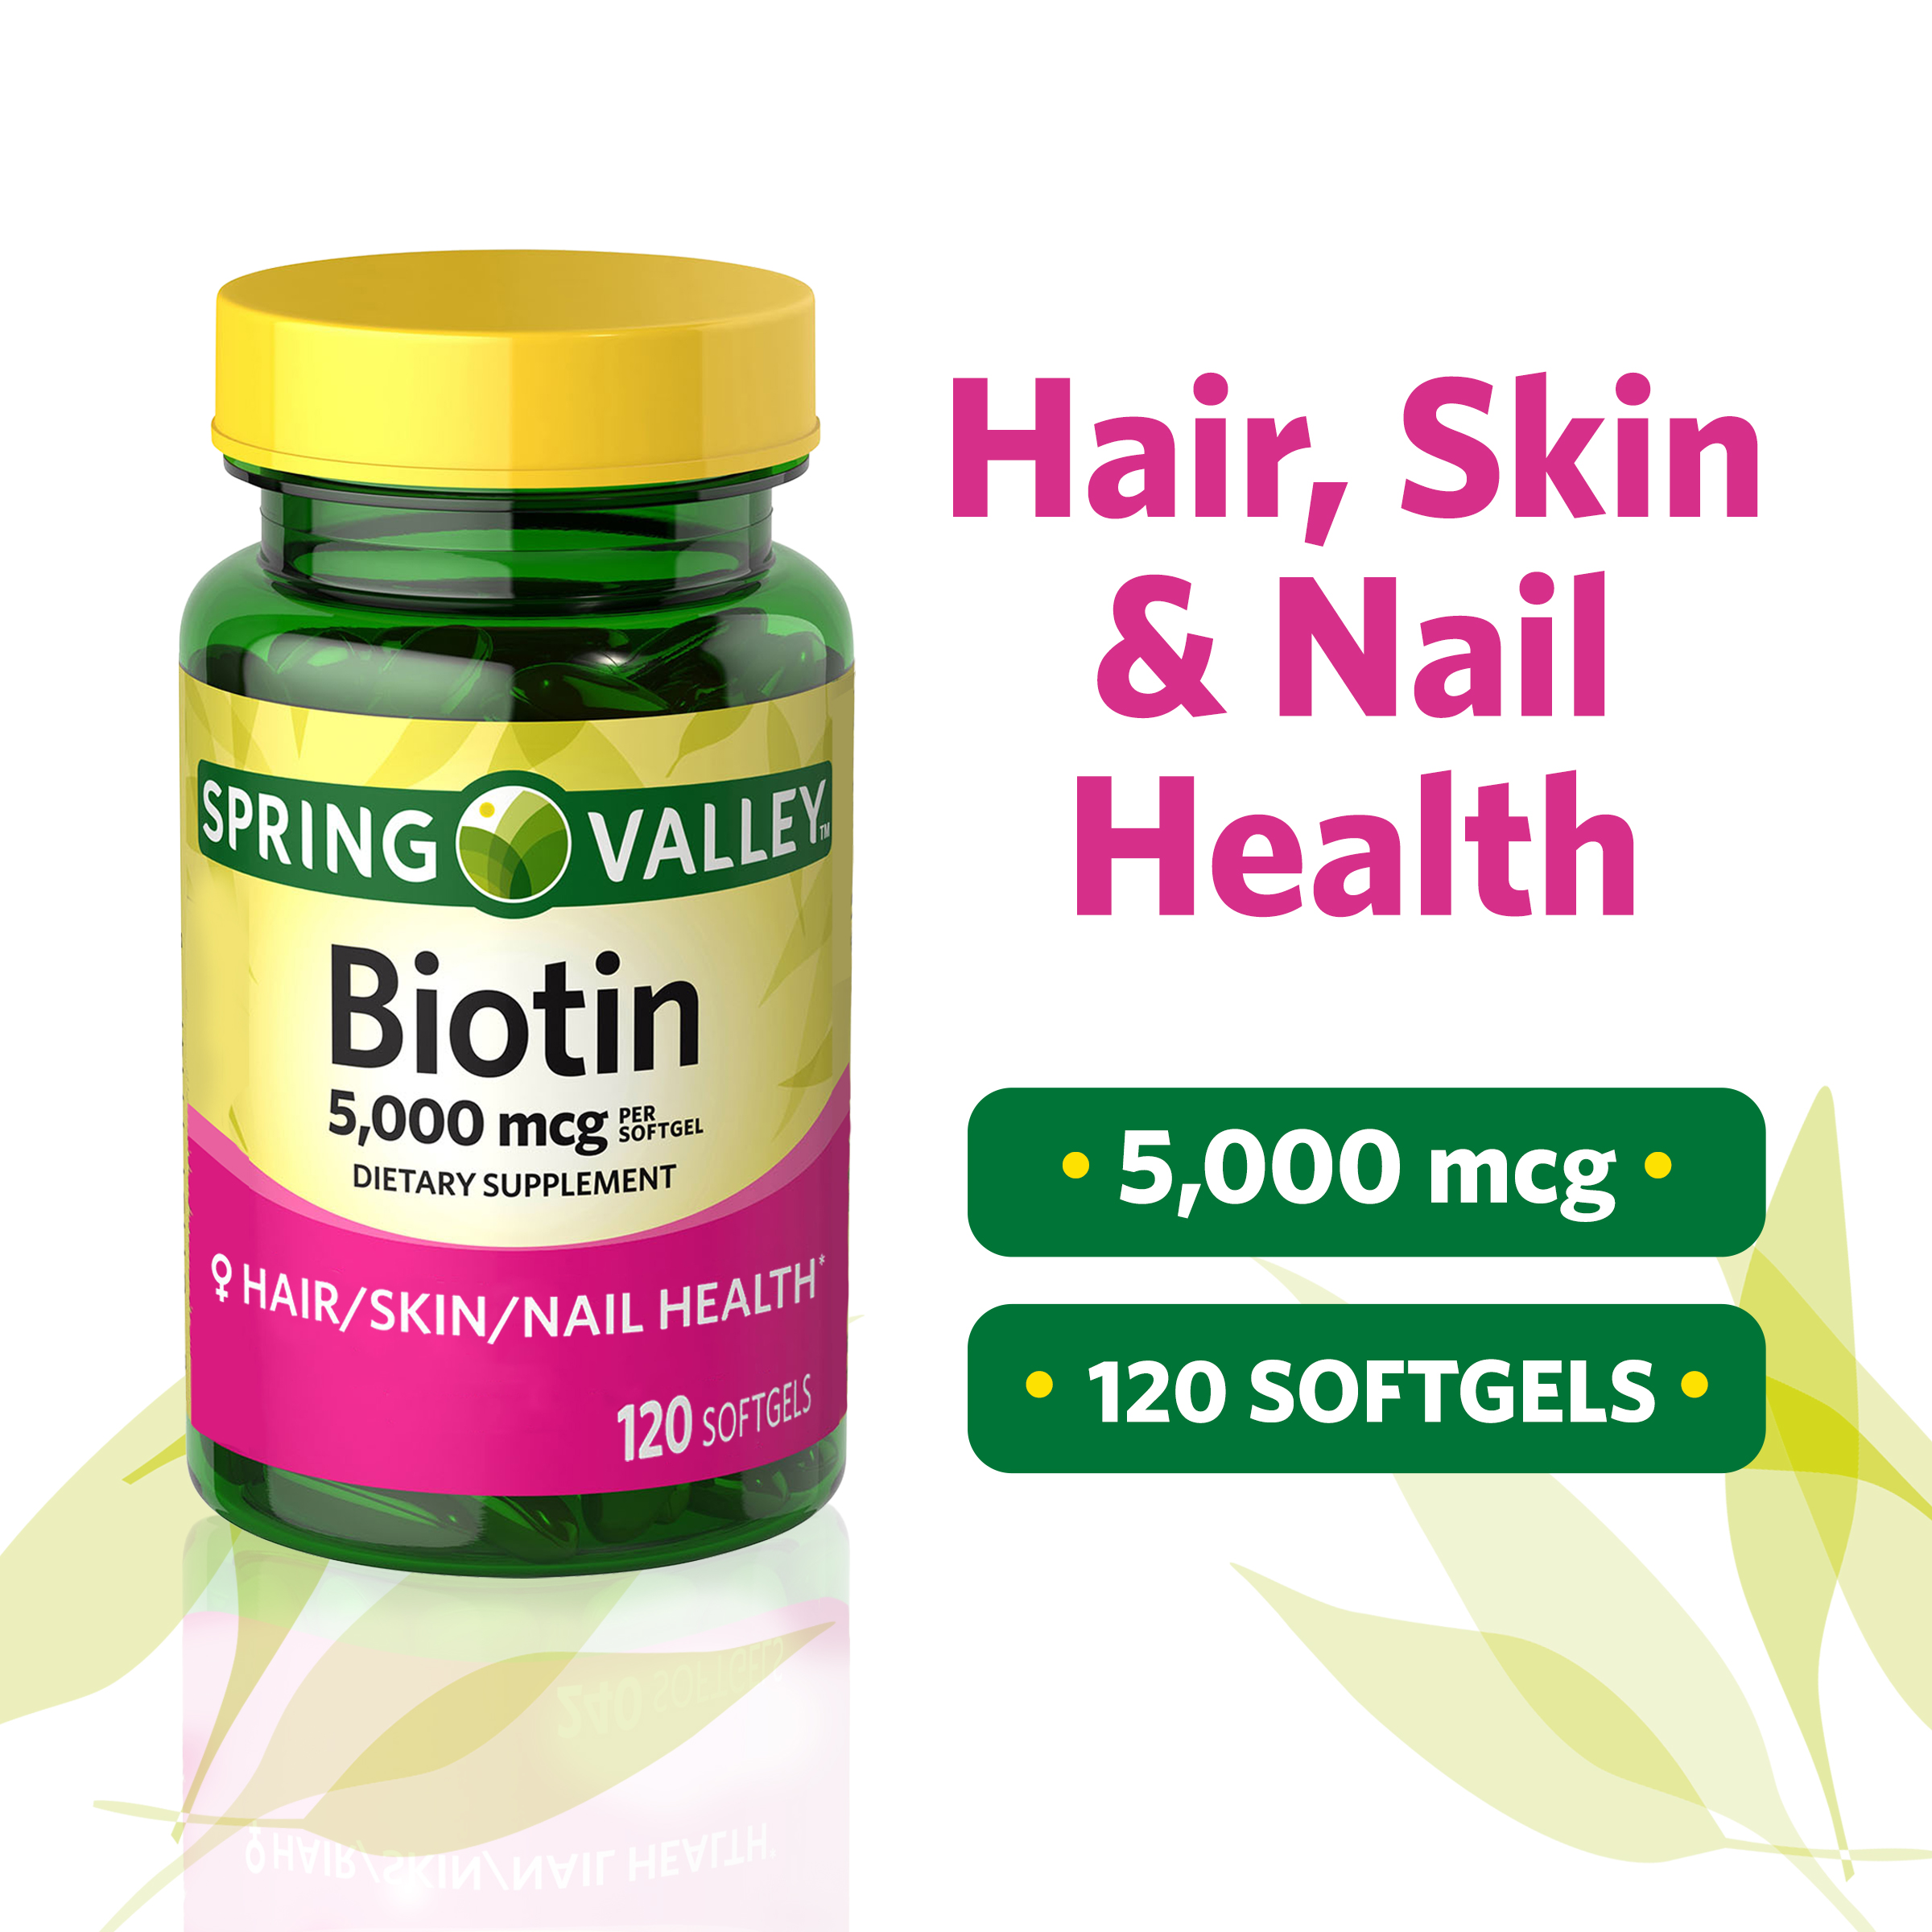 Spring Valley Biotin Hair/Skin/Nails Health Dietary Supplement Softgels, 5,000 mcg, 120 Count - image 2 of 16